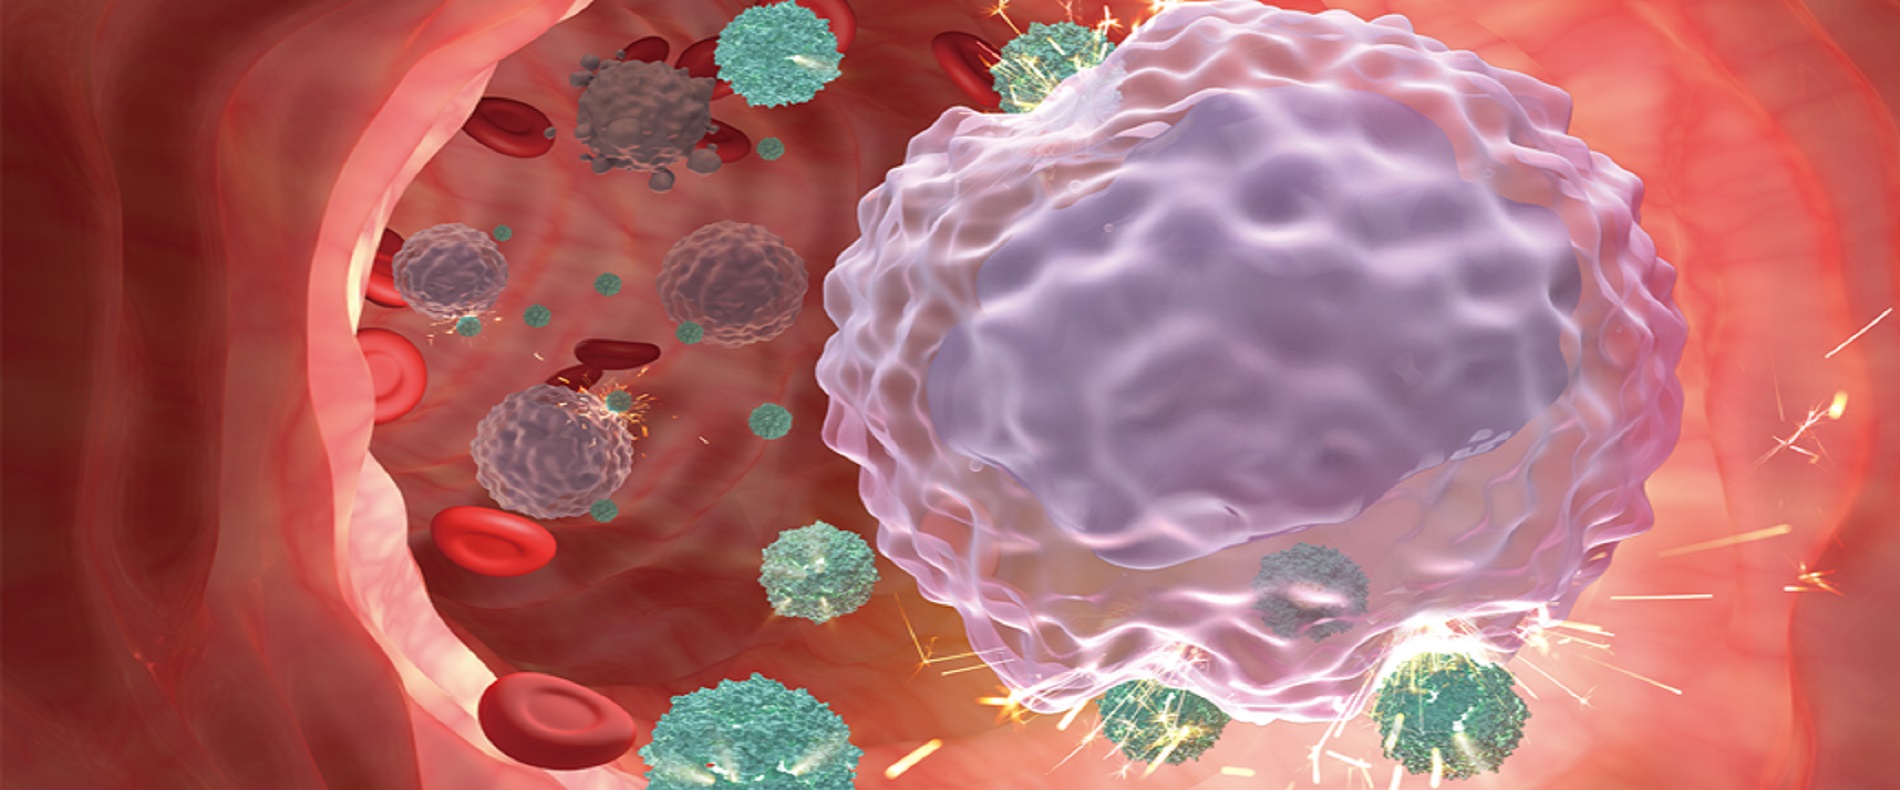 Ferritin-based Nanomedicine Developed for Targeted Leukemia Therapy